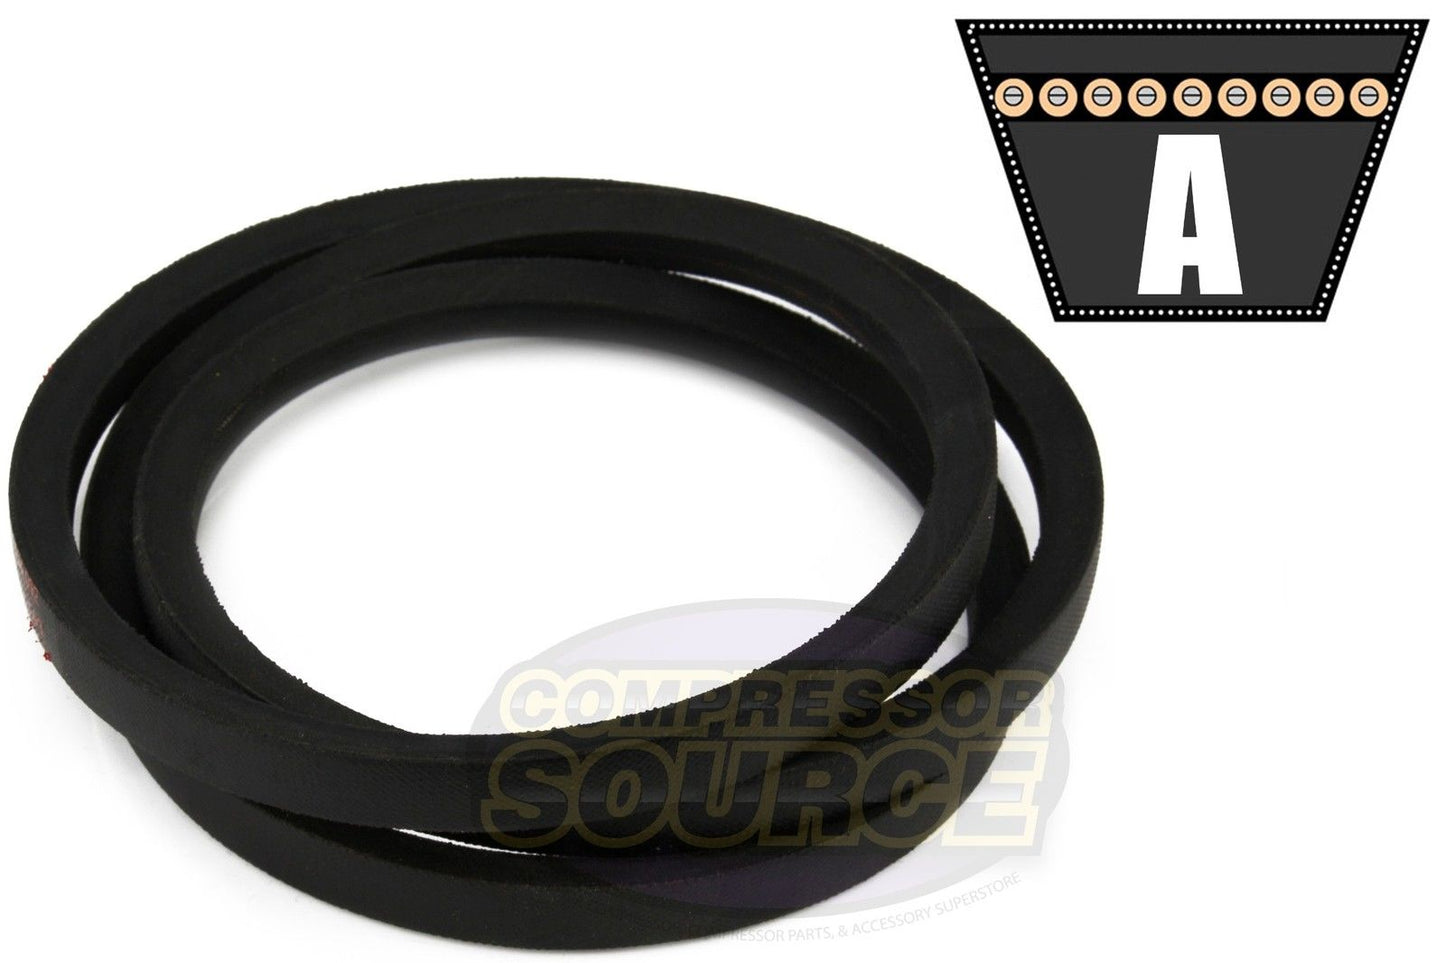 A57 Replacement High Quality Industrial & Lawn Mower 1/2" x 59" V Belt 4L590